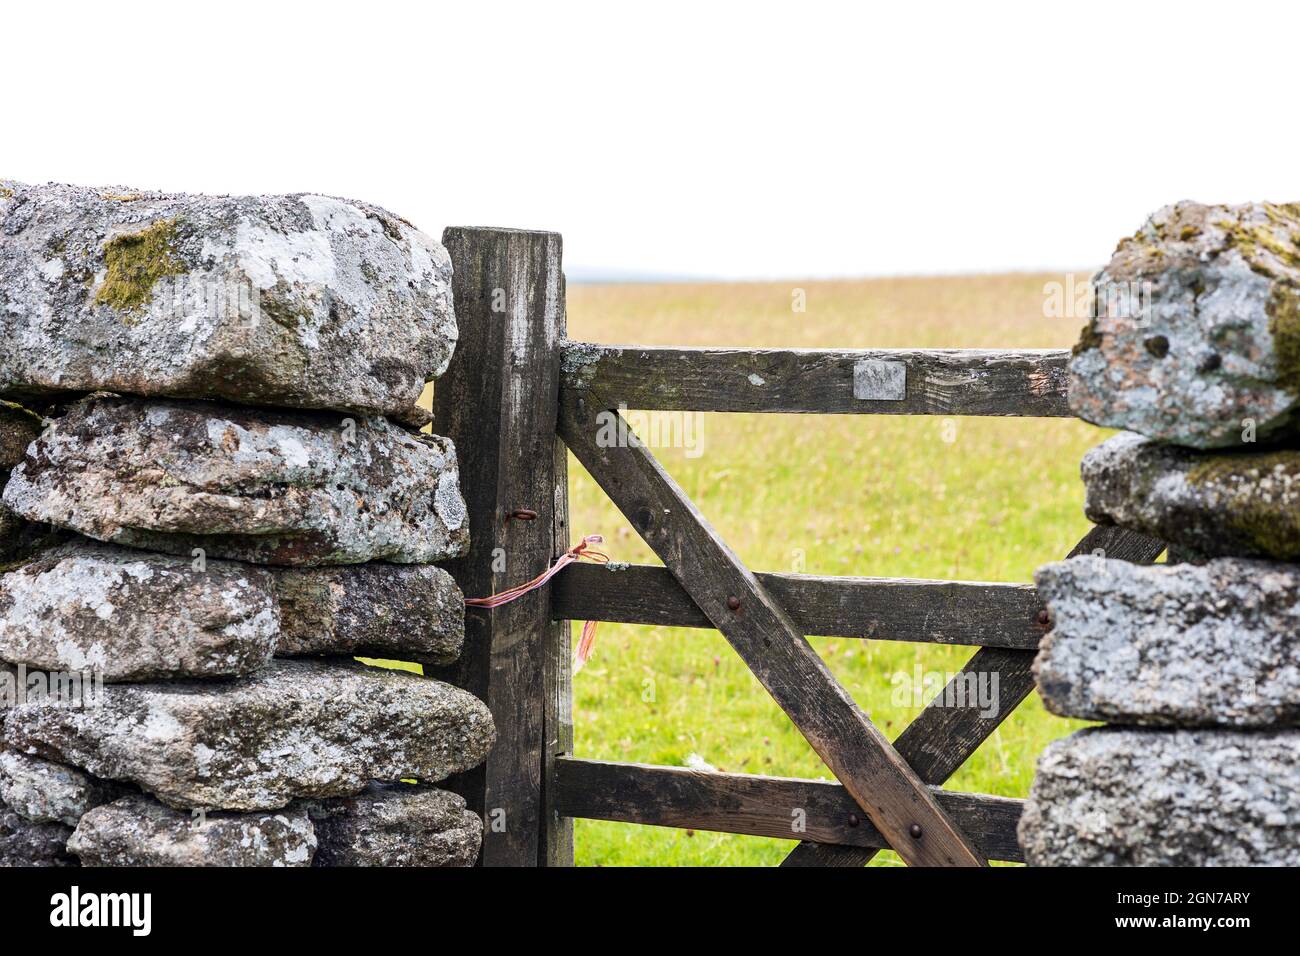 Footpath gate in a Traditional Dry Stone Wall Dartmoor Devon England Stock Photo